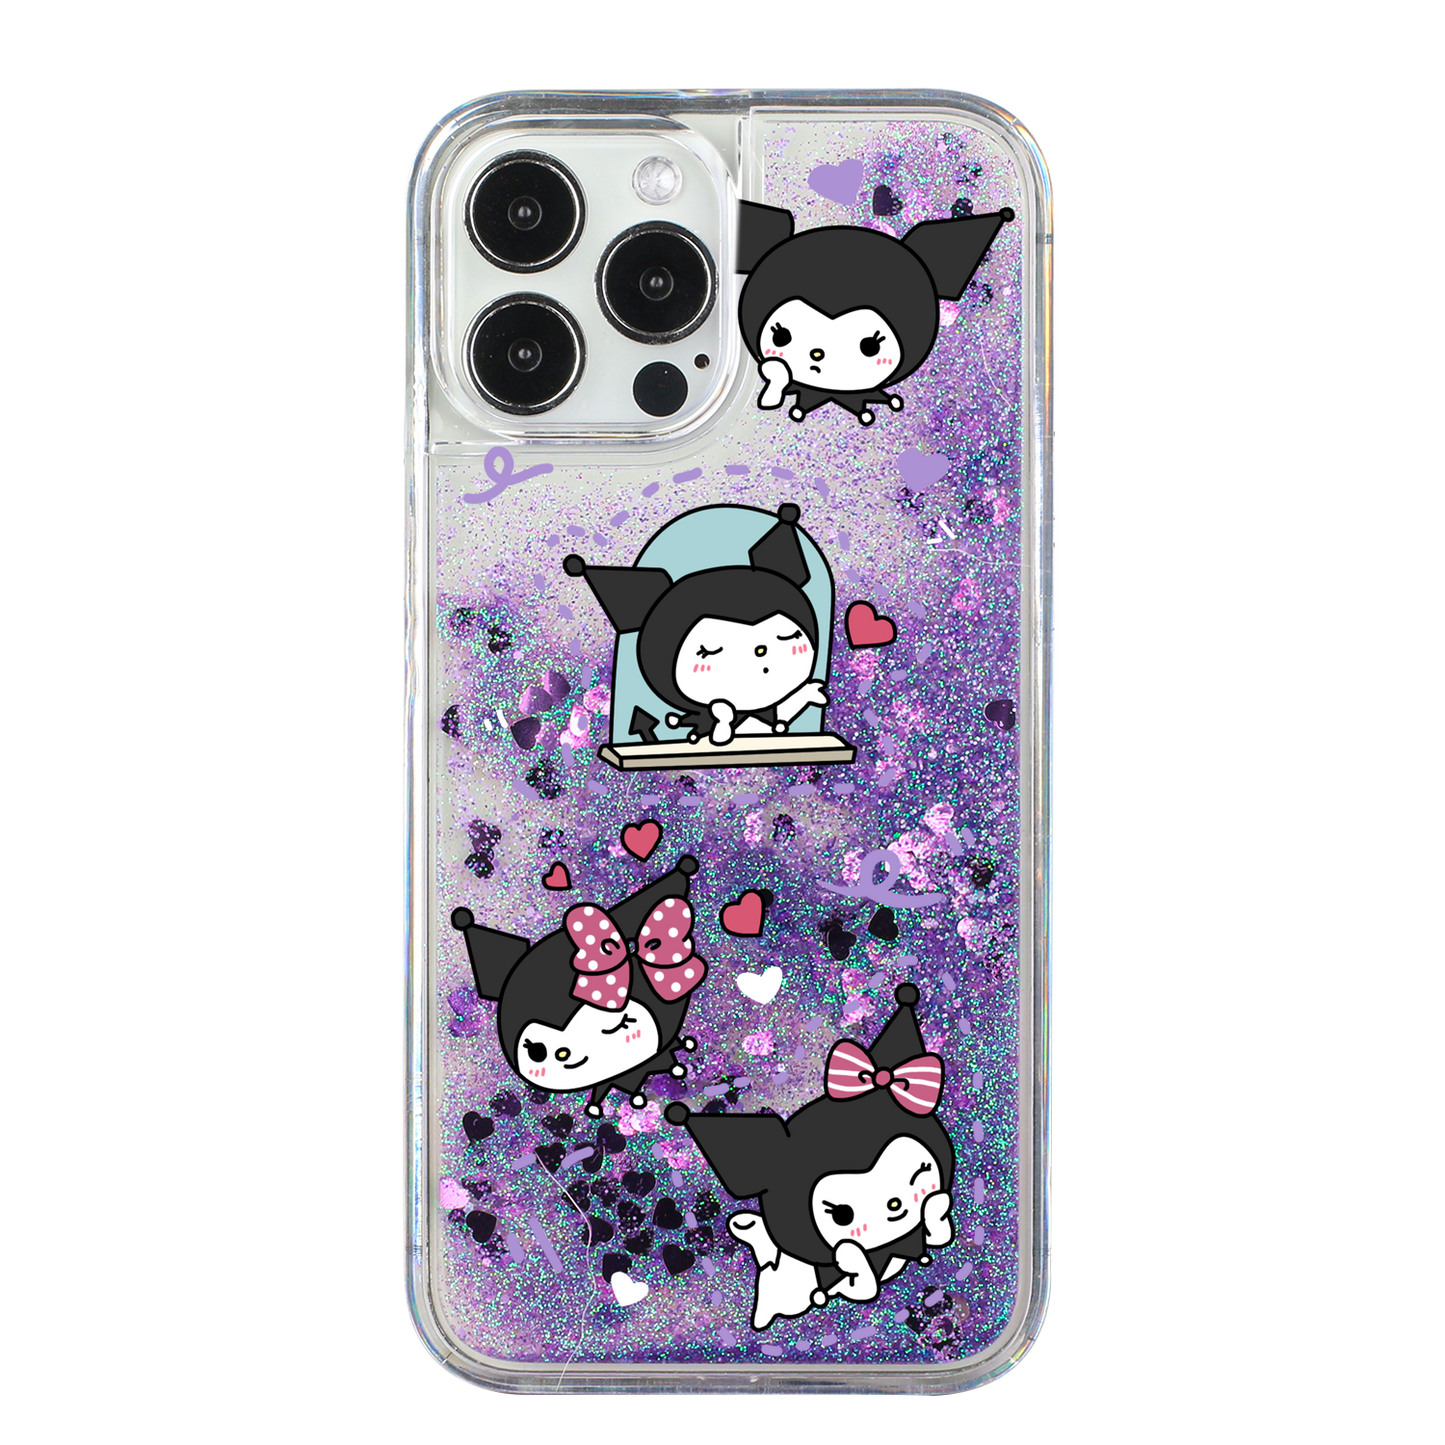 Louis Vuitton Hello Kitty iPhone X/Xs | iPhone Xs Max Case